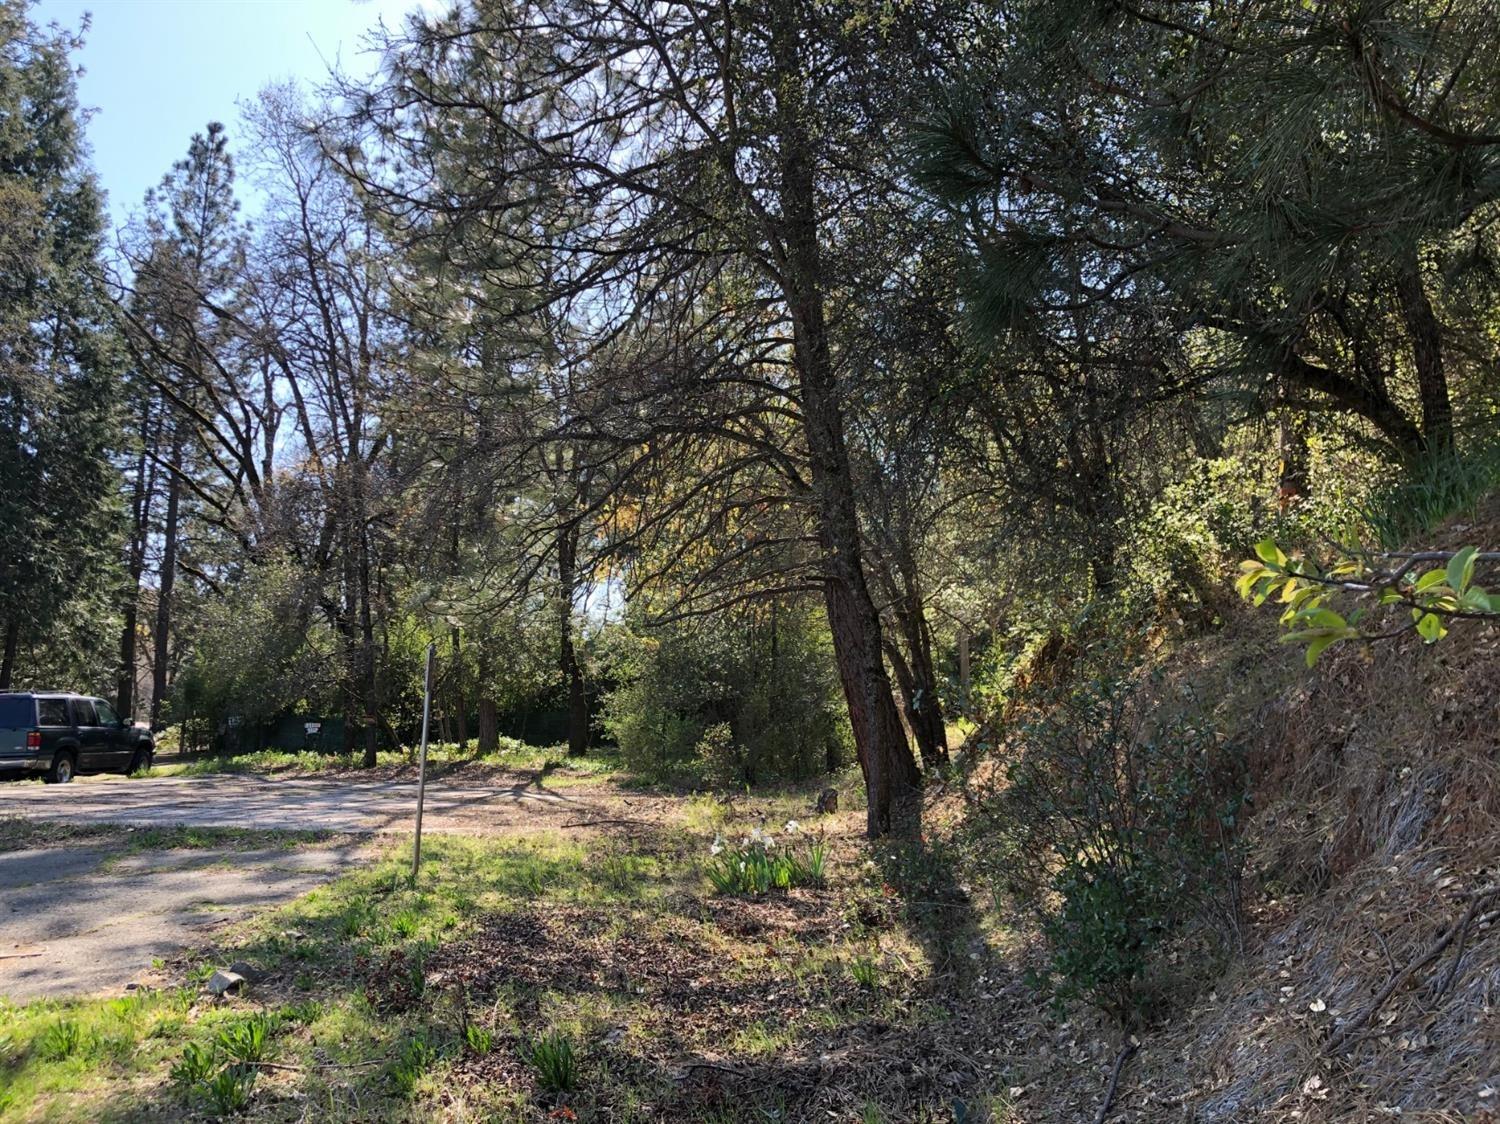 0.58 Acres. Easy Freeway Access. Zoned for Freeway Services. Close to Lake Arthur. Flat Building Area. Old pad & very old septic on site. Corners identified. Property has been perked. Surrounded by trees. Close to Motel, Gas Station and small store.